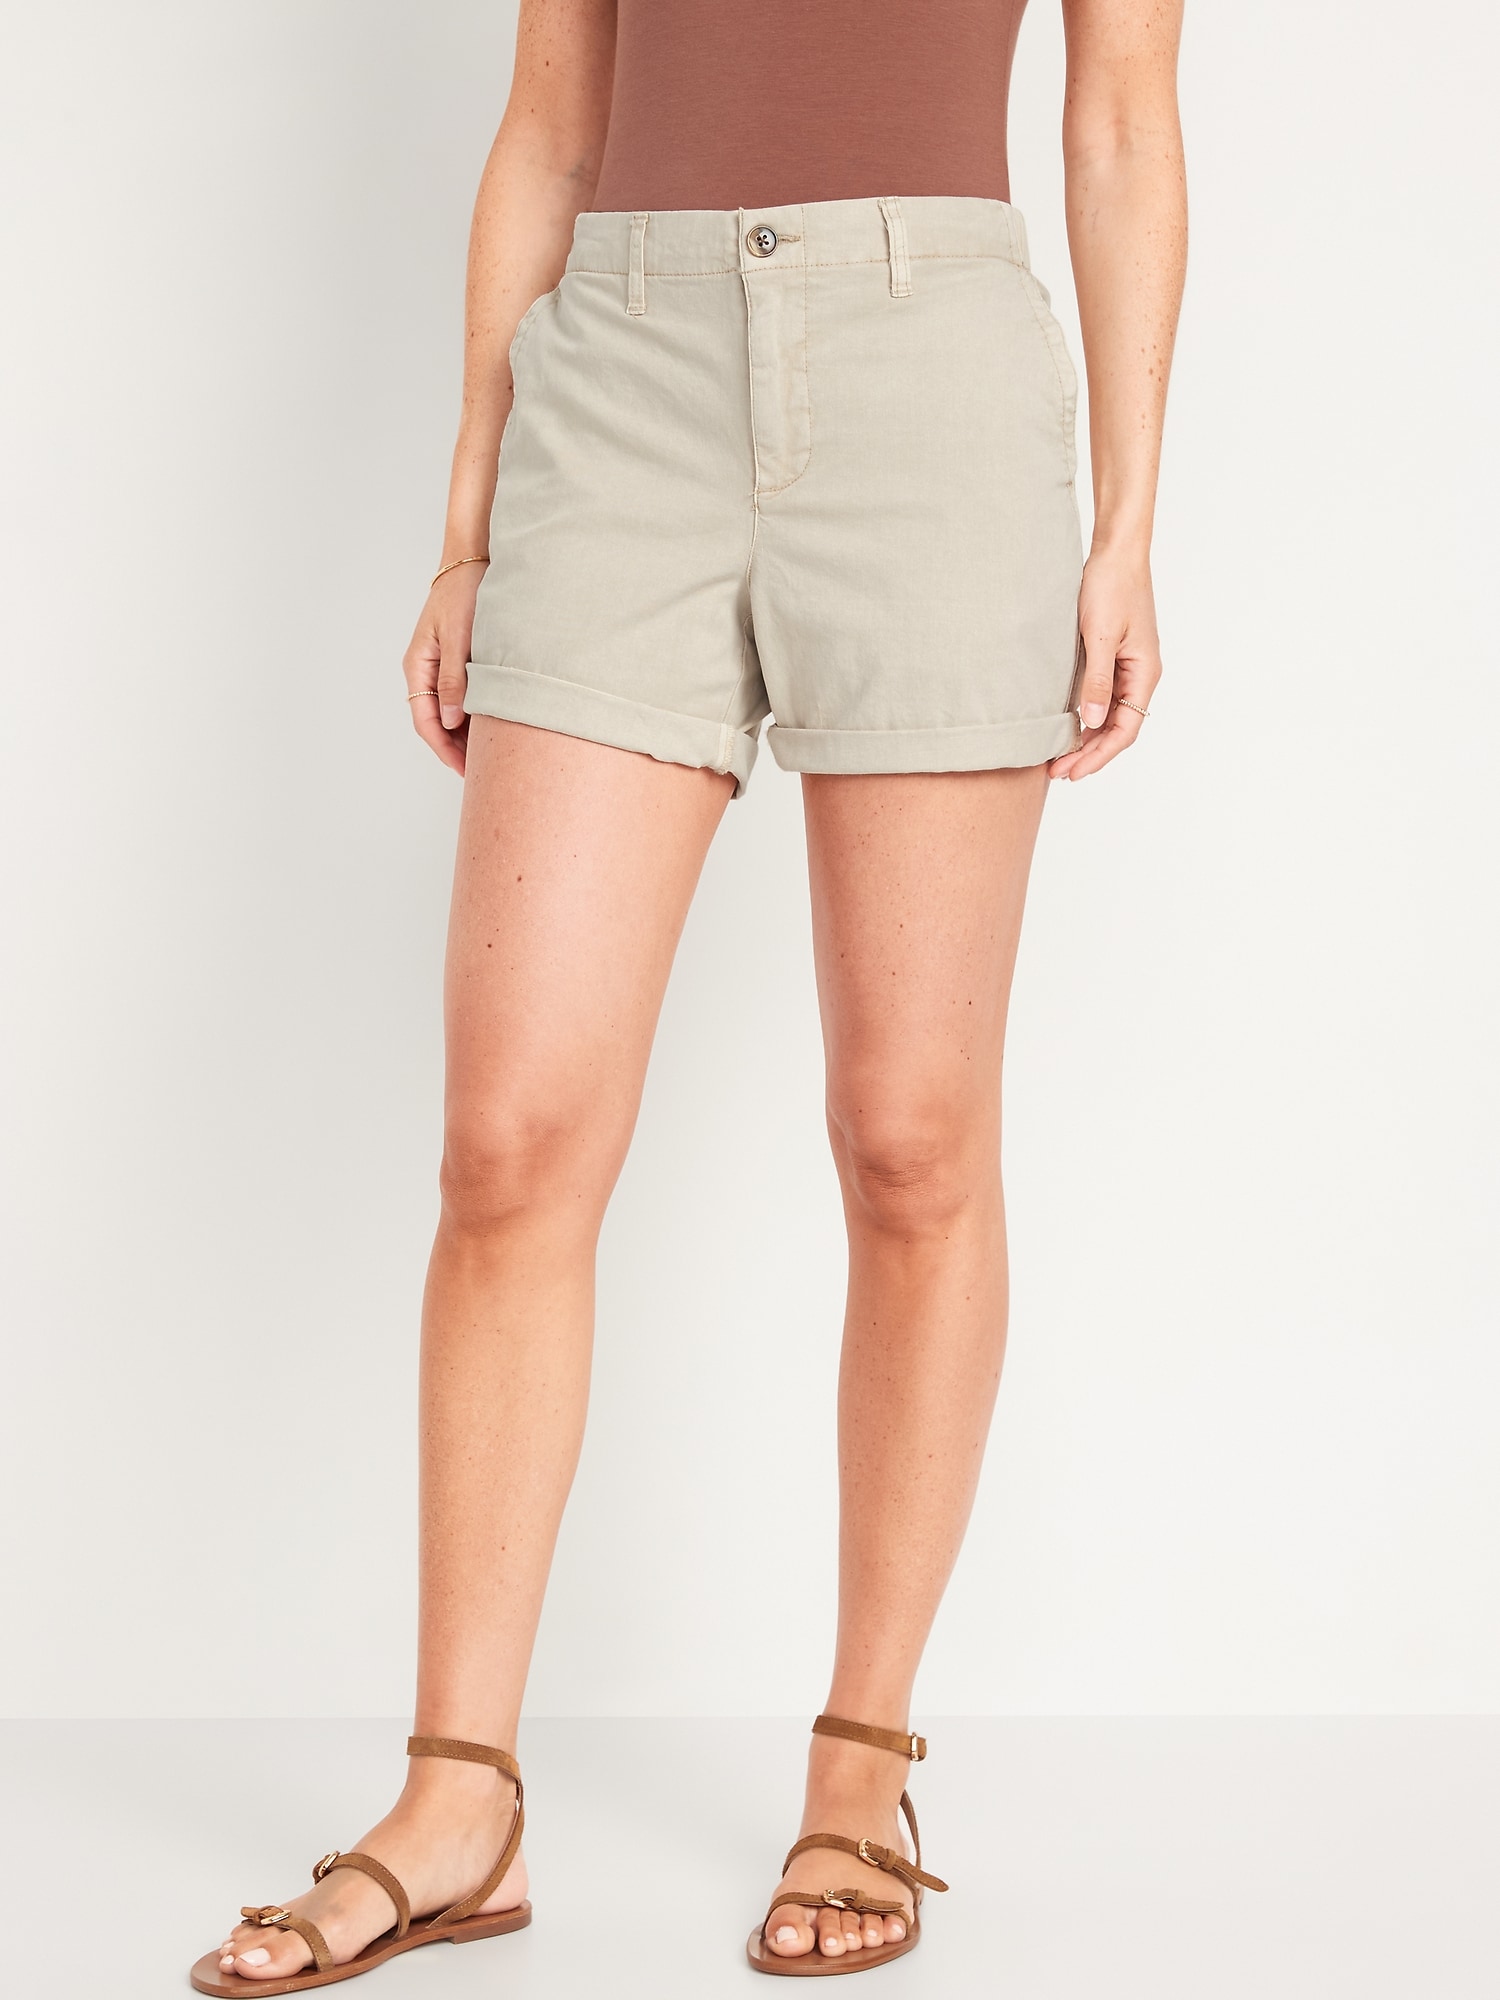 High-Waisted OGC Pull-On Chino Shorts for Women -- 5-inch inseam